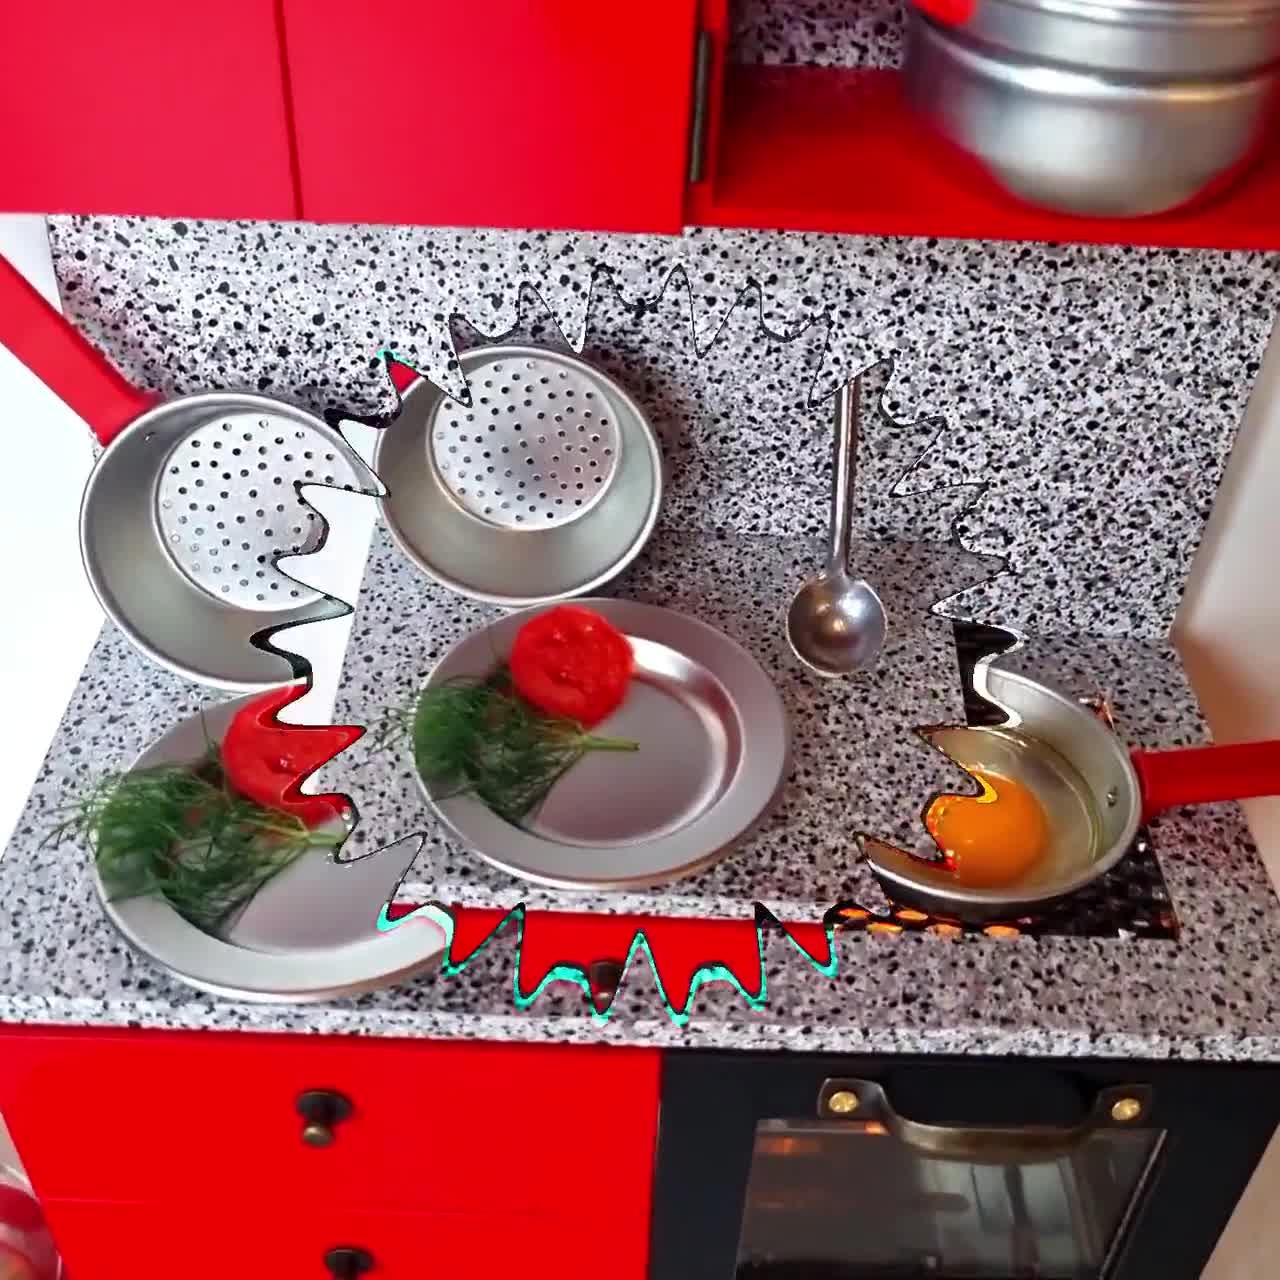 Red Miniature Kitchen REAL FOOD Cooking Tiny Cooking Set Mini Stove Working  Miniature Kitchen With Accessories -  Israel